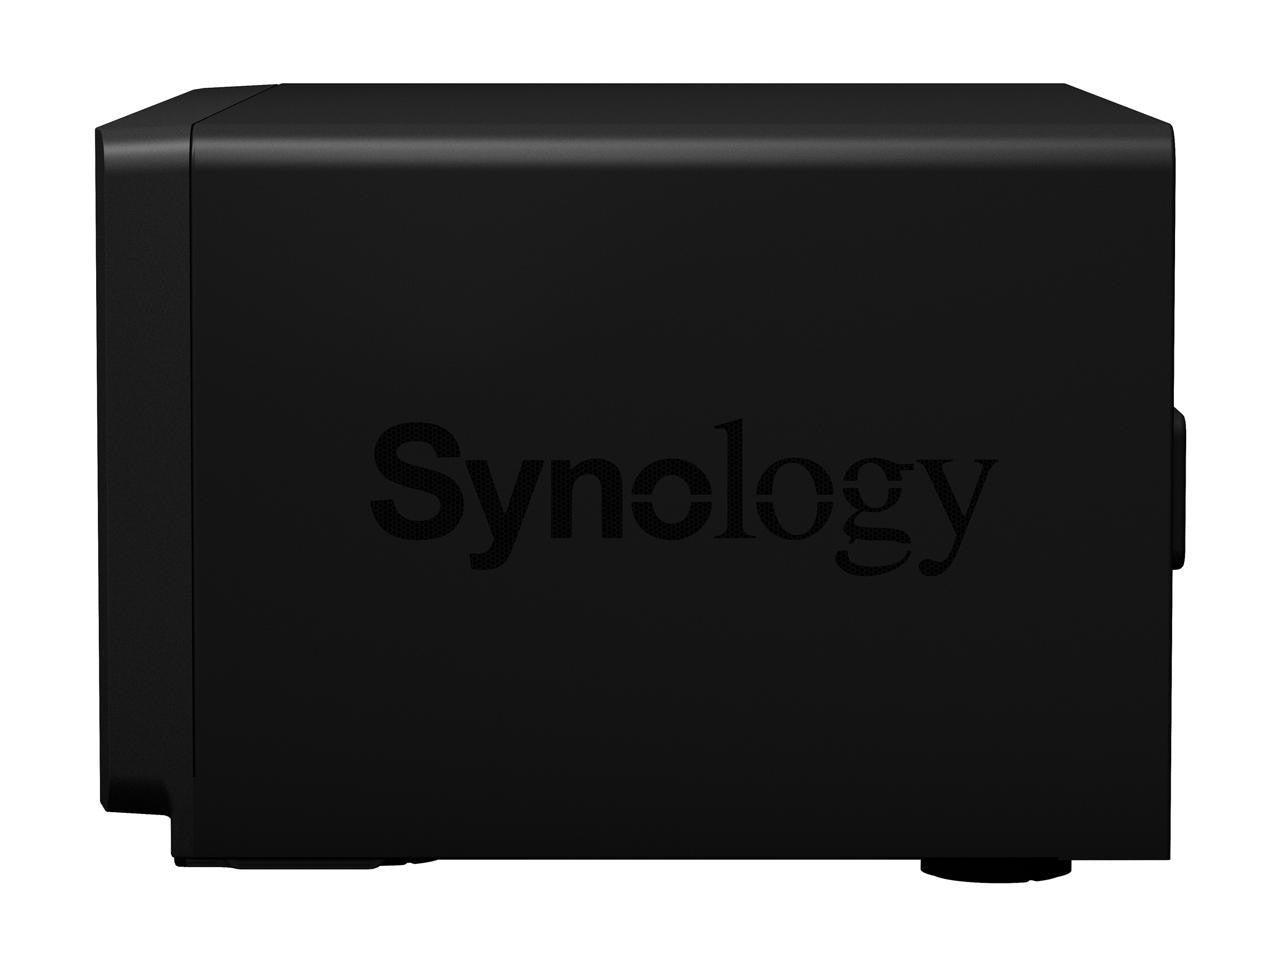 Synology DS1821+ 8-BAY DiskStation with 16GB RAM, 1.6TB (2x800GB) Cache and 64TB (8 x 8TB) of Synology Enterprise Drives Fully Assembled and Tested